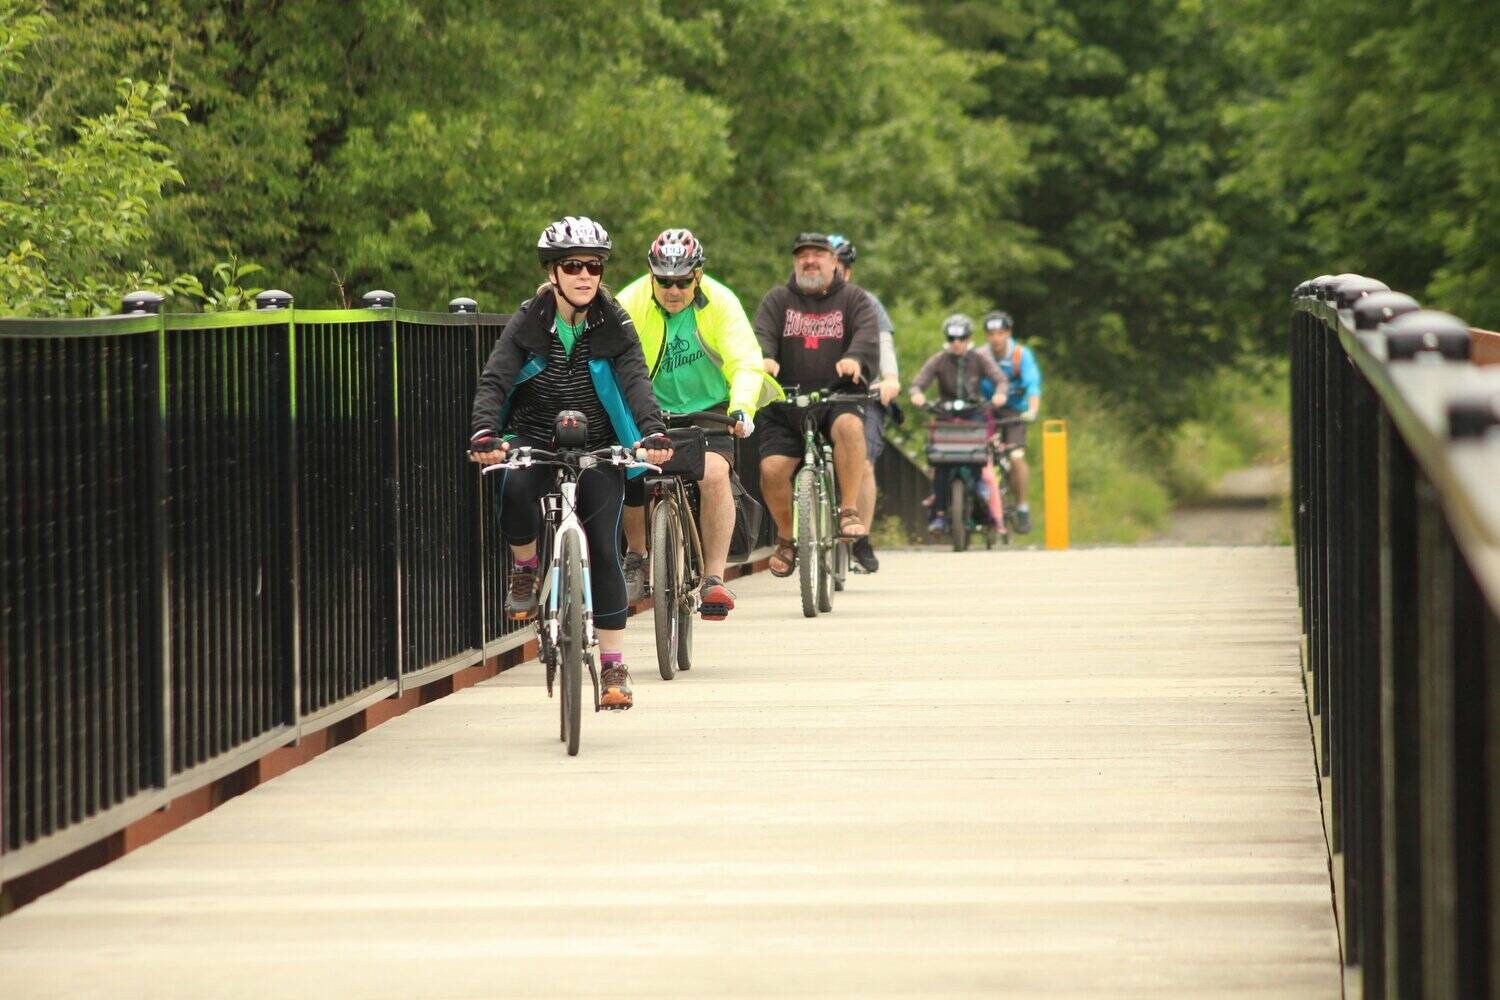 Chronicle file photo
Ride the Willapa is going back to its roots, celebrating its eighth year by coming back to Chehalis and offering an overnight campout along with its June 22-23 bike ride.